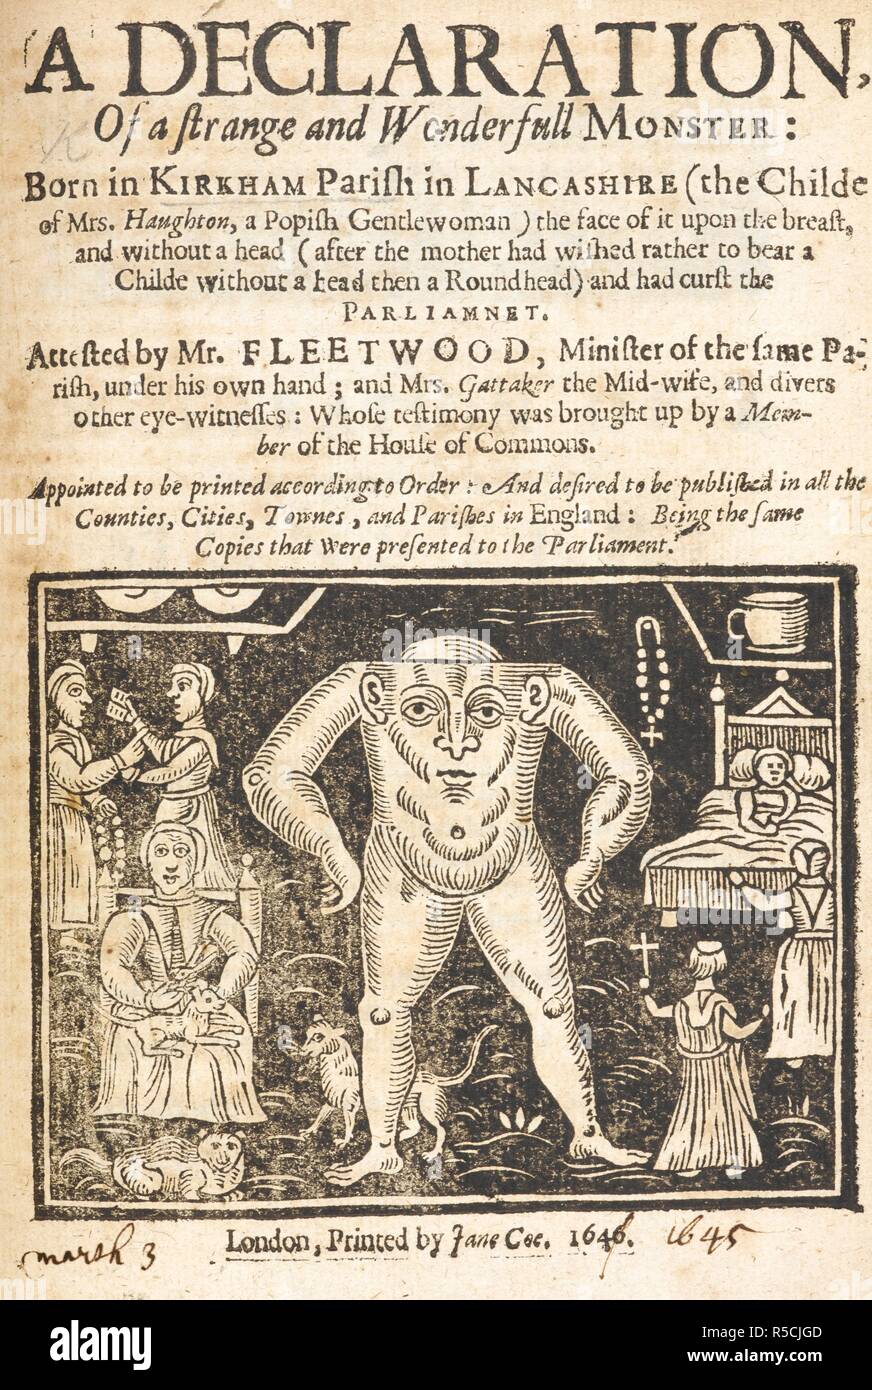 Text and a woodcut depicting a headless creature with a face in it's chest.  A declaration of a strange and wonderfull monster born in Kirkham parish in  Lancashire. ... Attested by Mr.